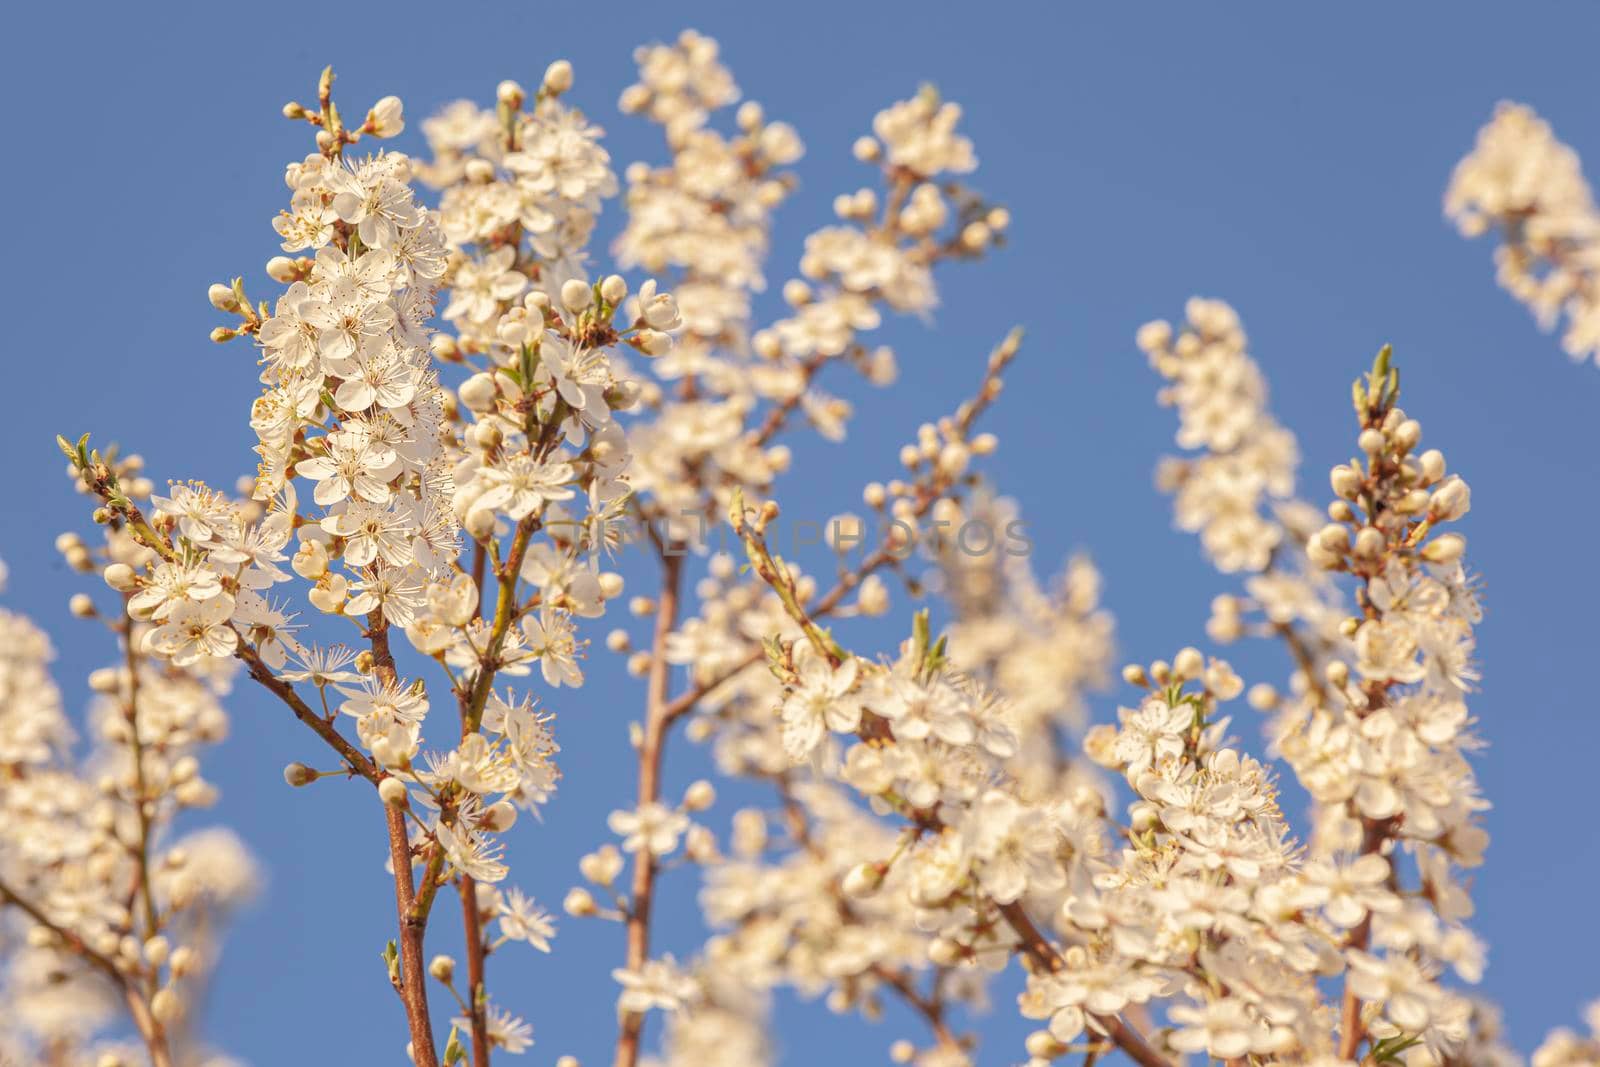 Plum tree flowers detail at sunset time in spring under a blue sky